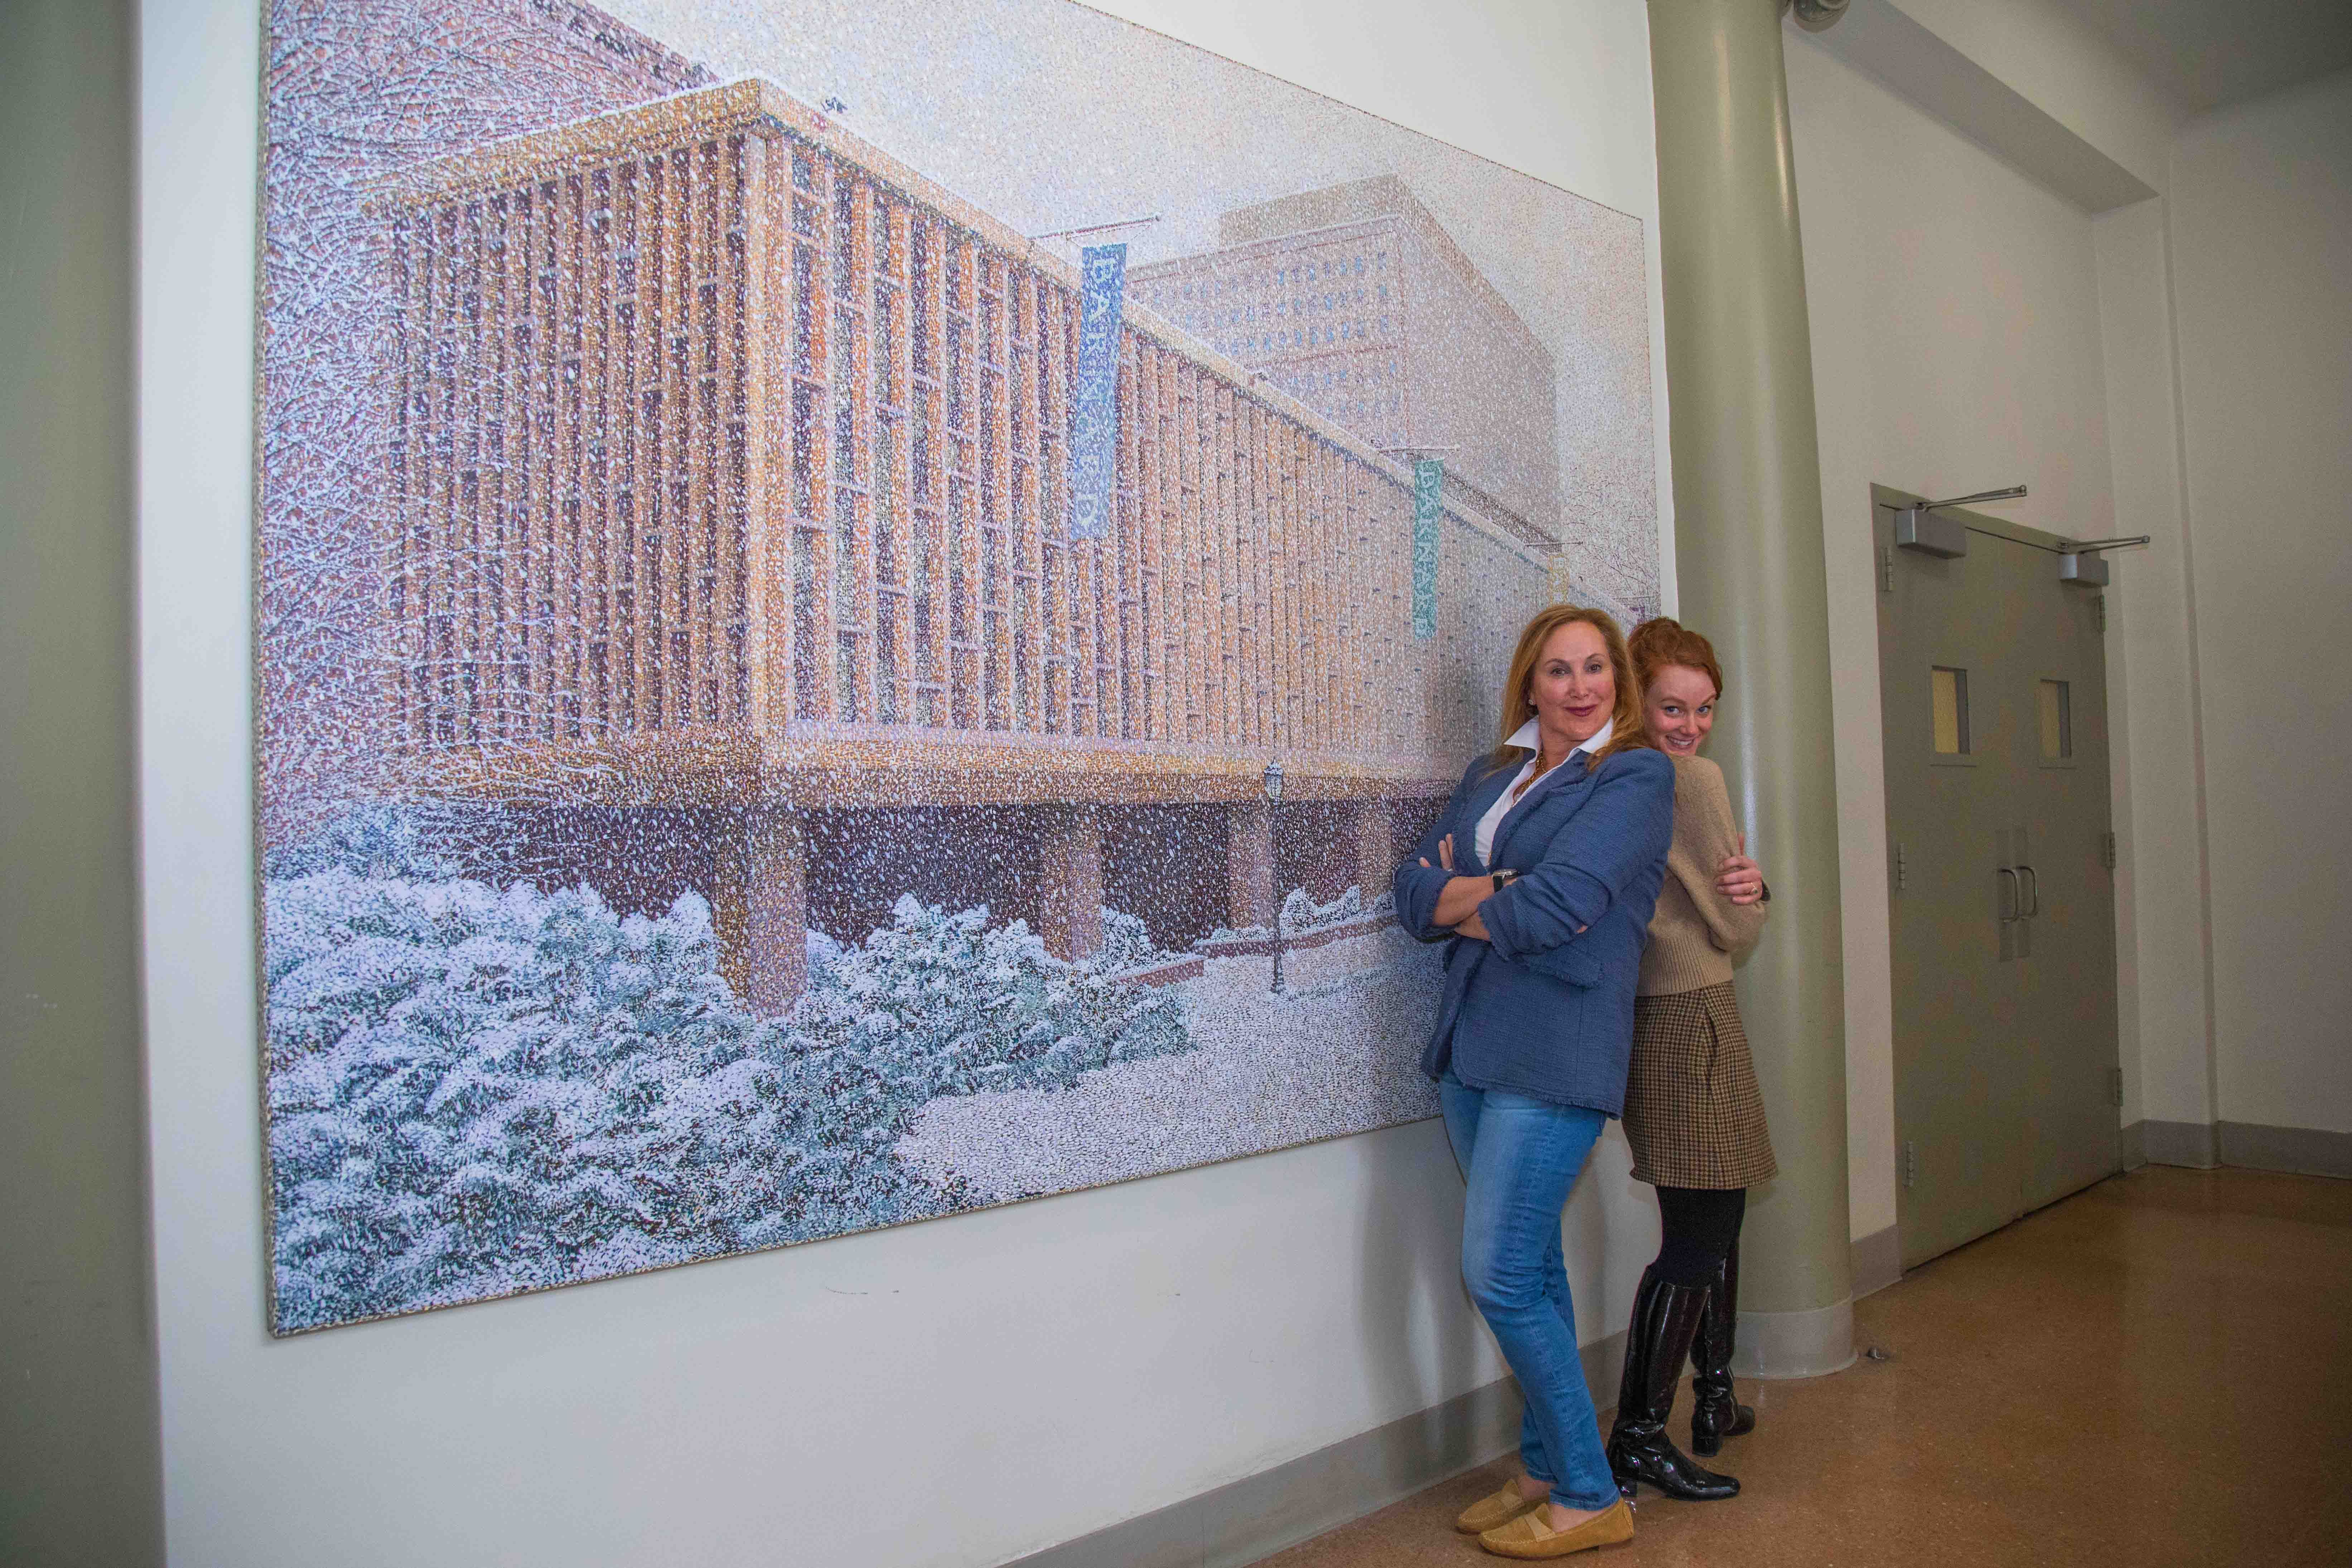 Cheryl Glicker Milstein ’82, P’14, Chair of the Barnard Board of Trustees, and Cynthia Talmadge posing in front of Lehman Hall painting